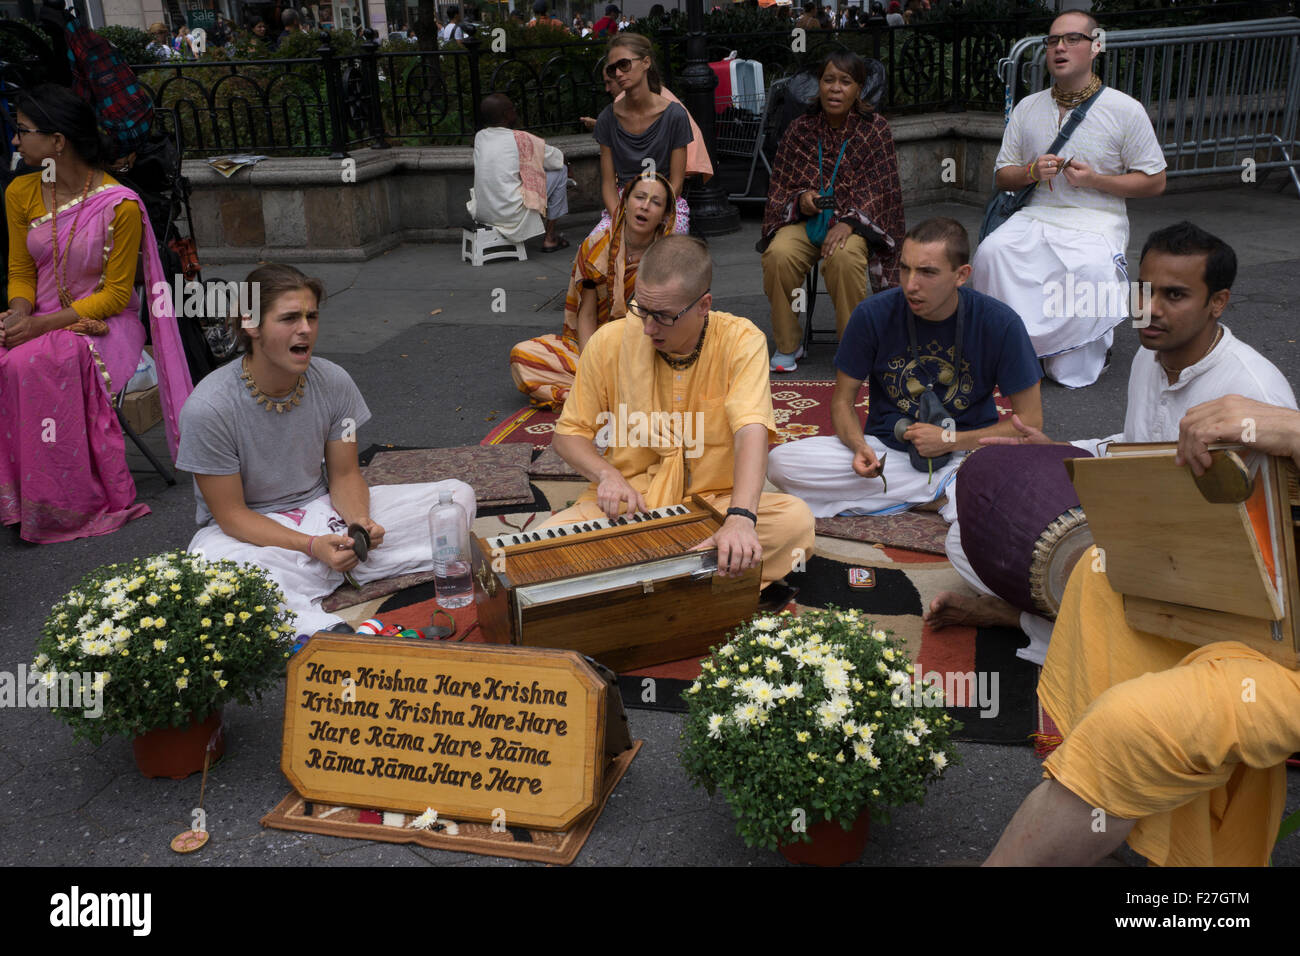 Members of the Hare Krishna movement chanting in Manhattan's Union Square Park. Stock Photo